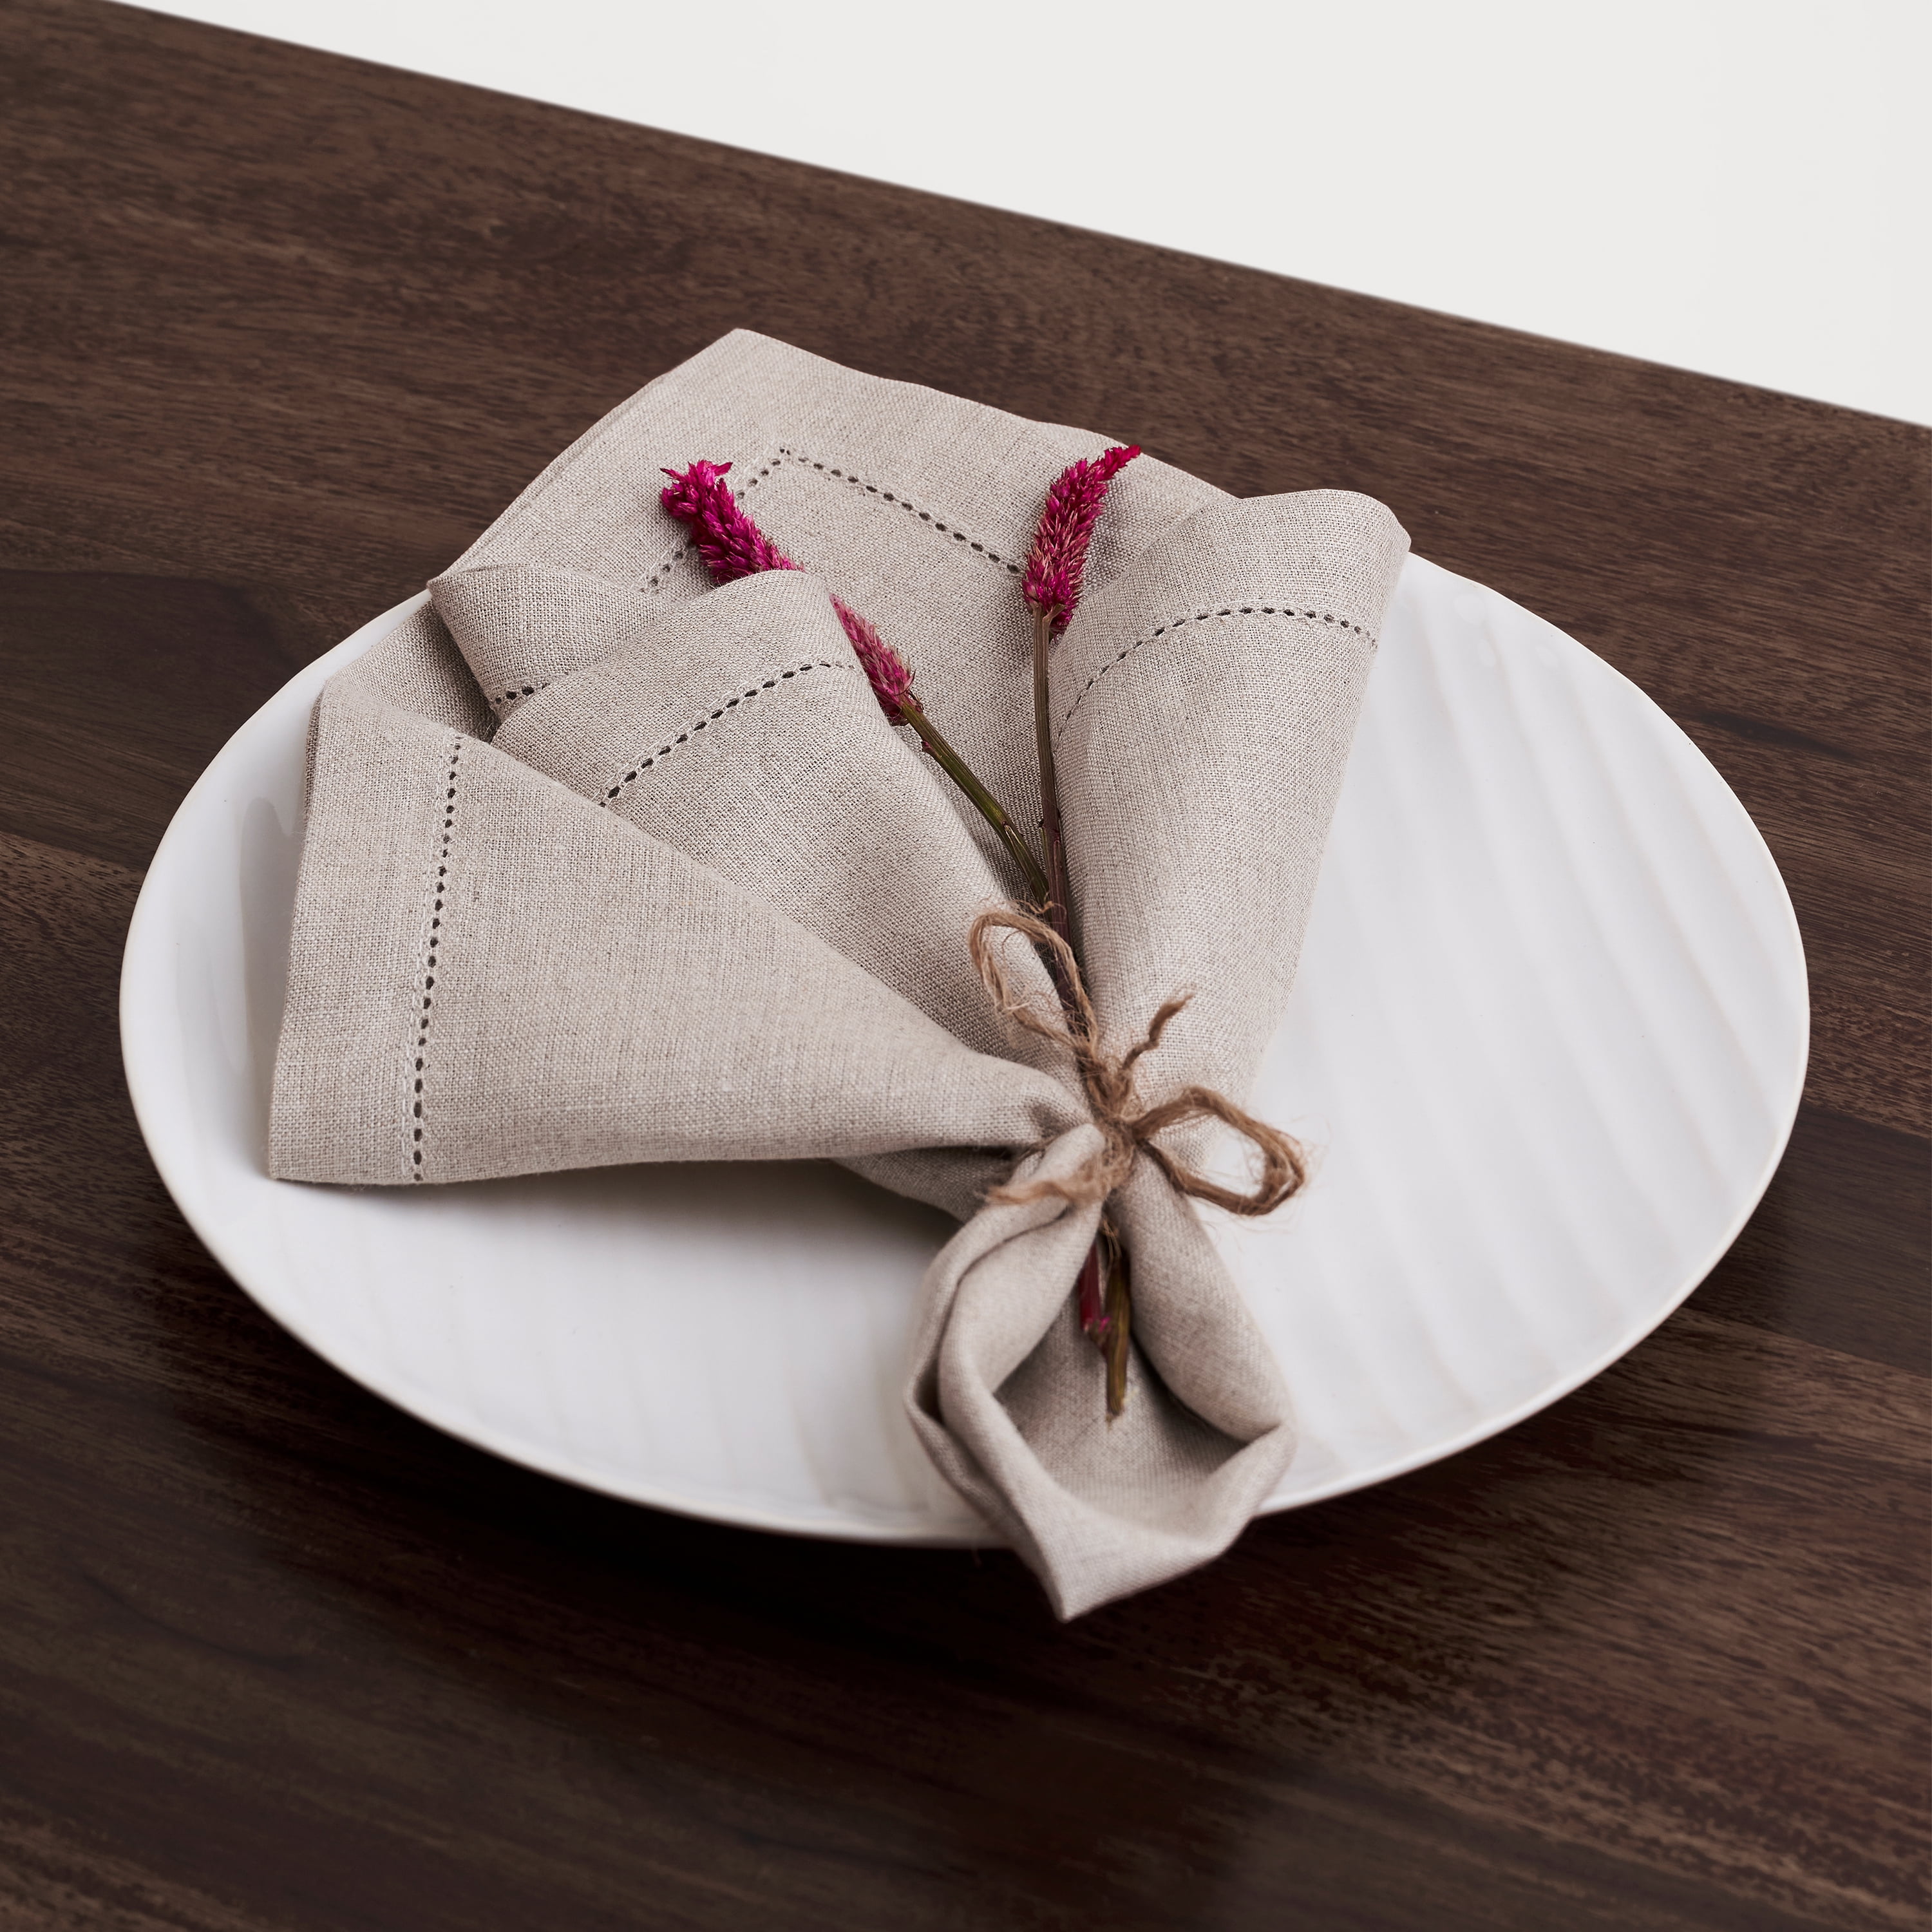 Cloth Napkin D’Moksha Homes 100% Pure Linen Hemstitch 20 x 20 inch White Set of 4 Dinner Napkins for Christmas- Natural Fabric European Flax Great Gift Choice Handmade with Mitered Corners